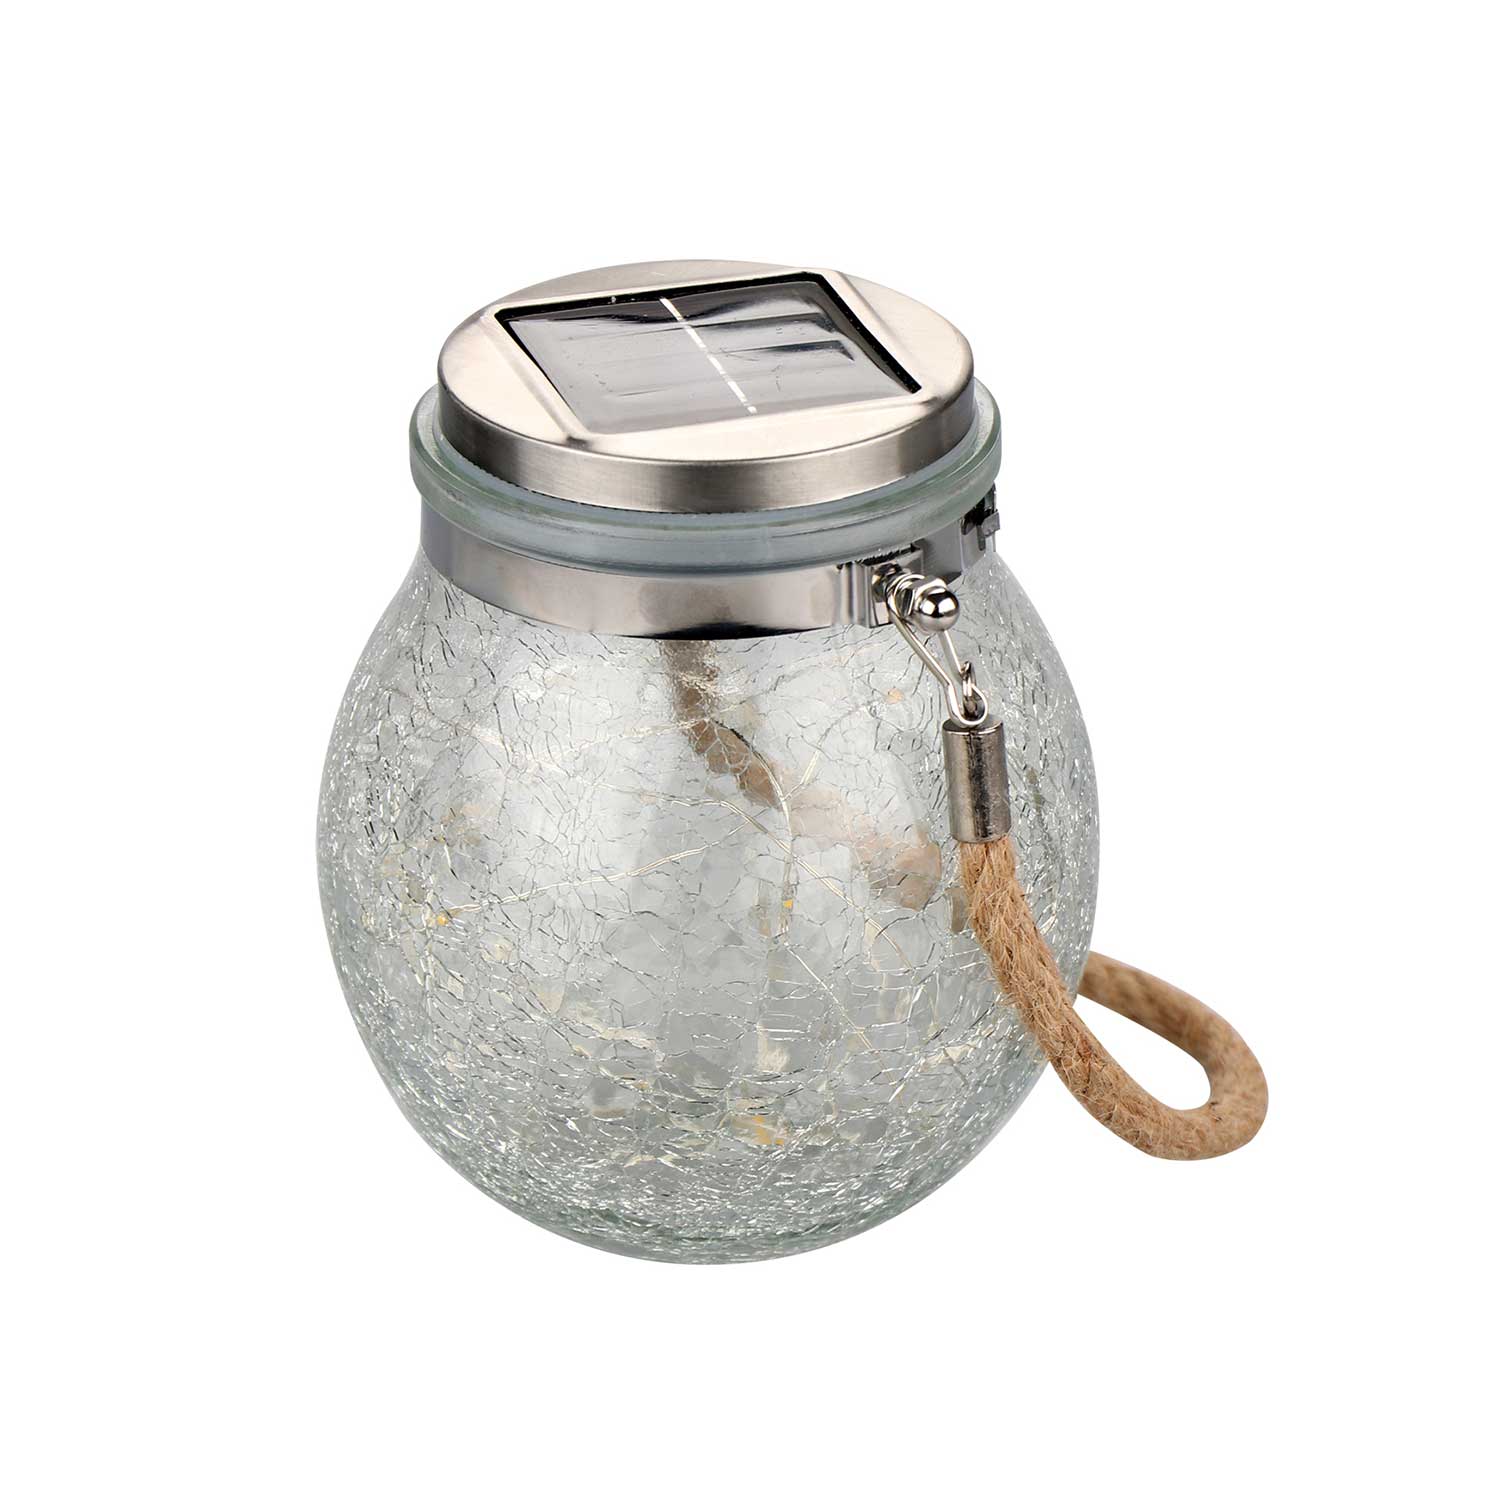 Home Quip Occassional Lighting -Glass Hanging Crackle Finish Lantern Solar Powered